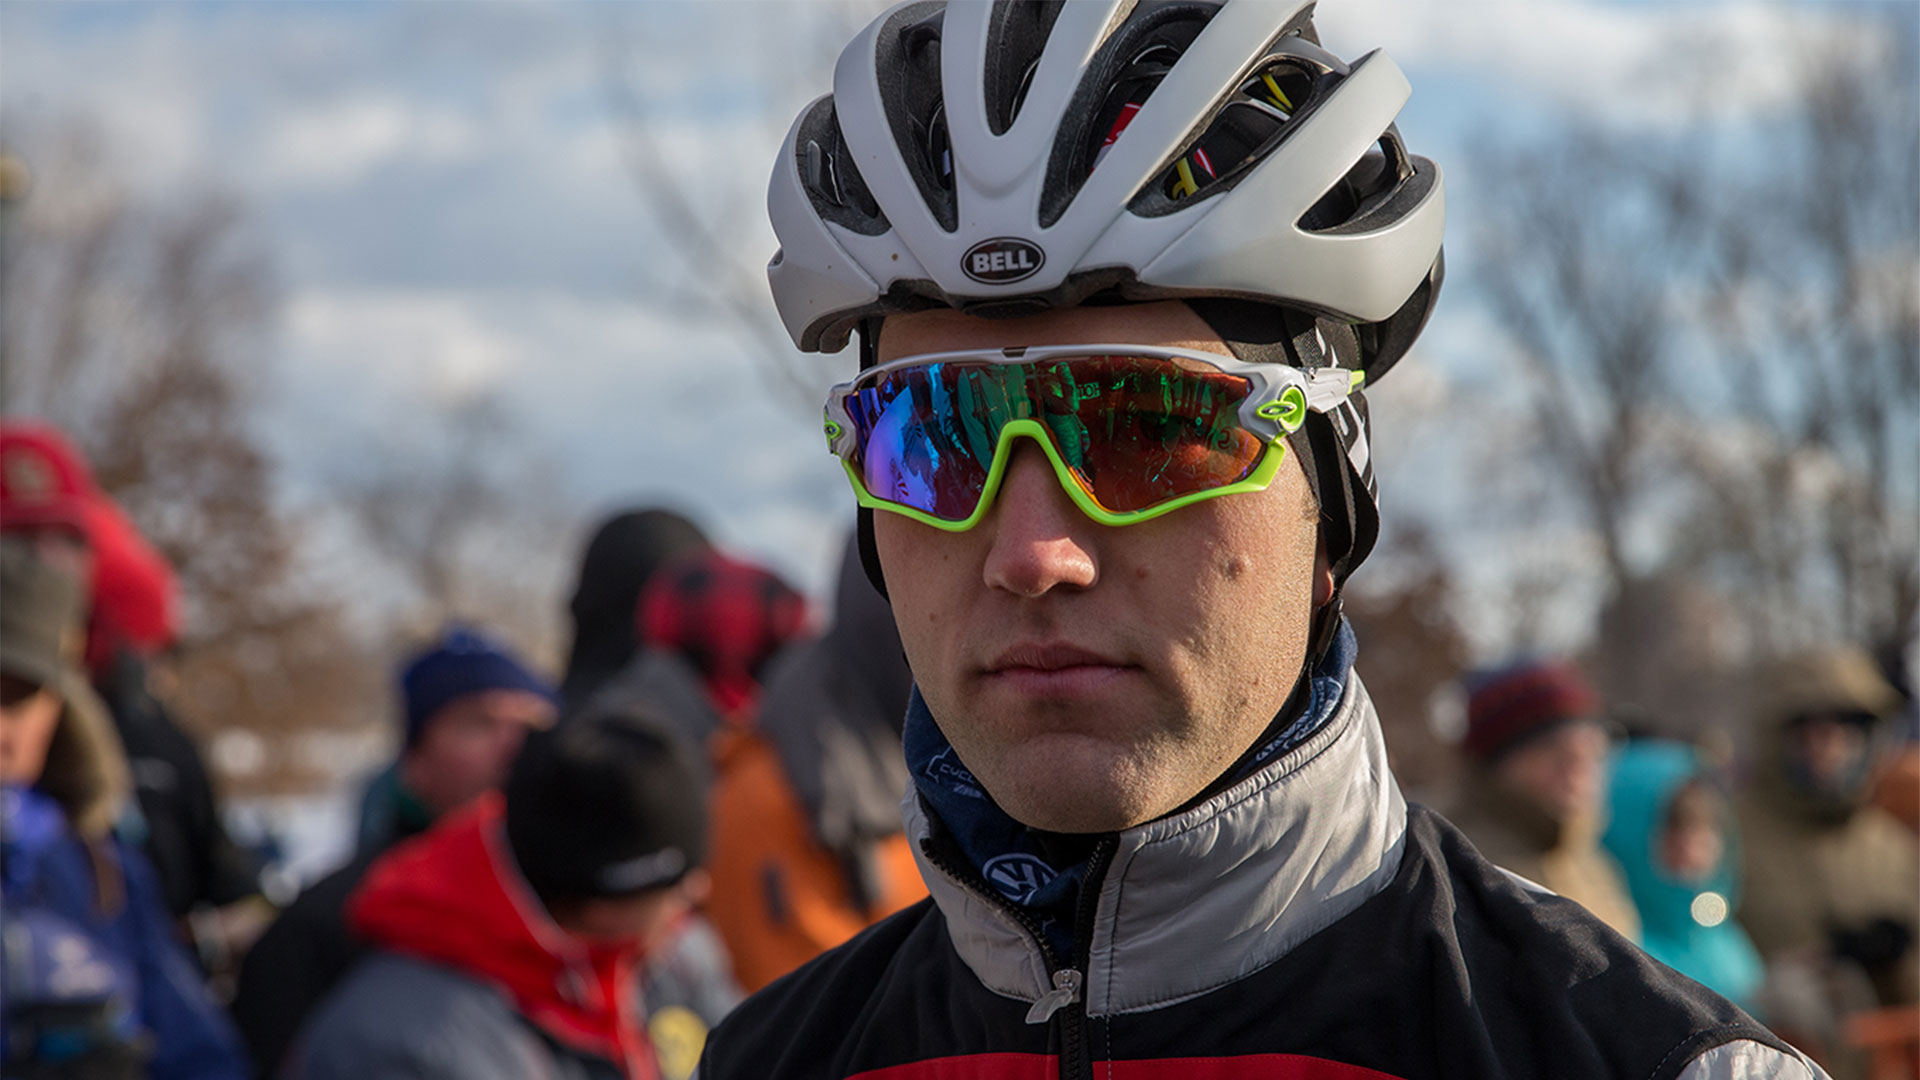 ’Cross Worlds Prep Q&A with Bell Athlete Tobin Ortenblad